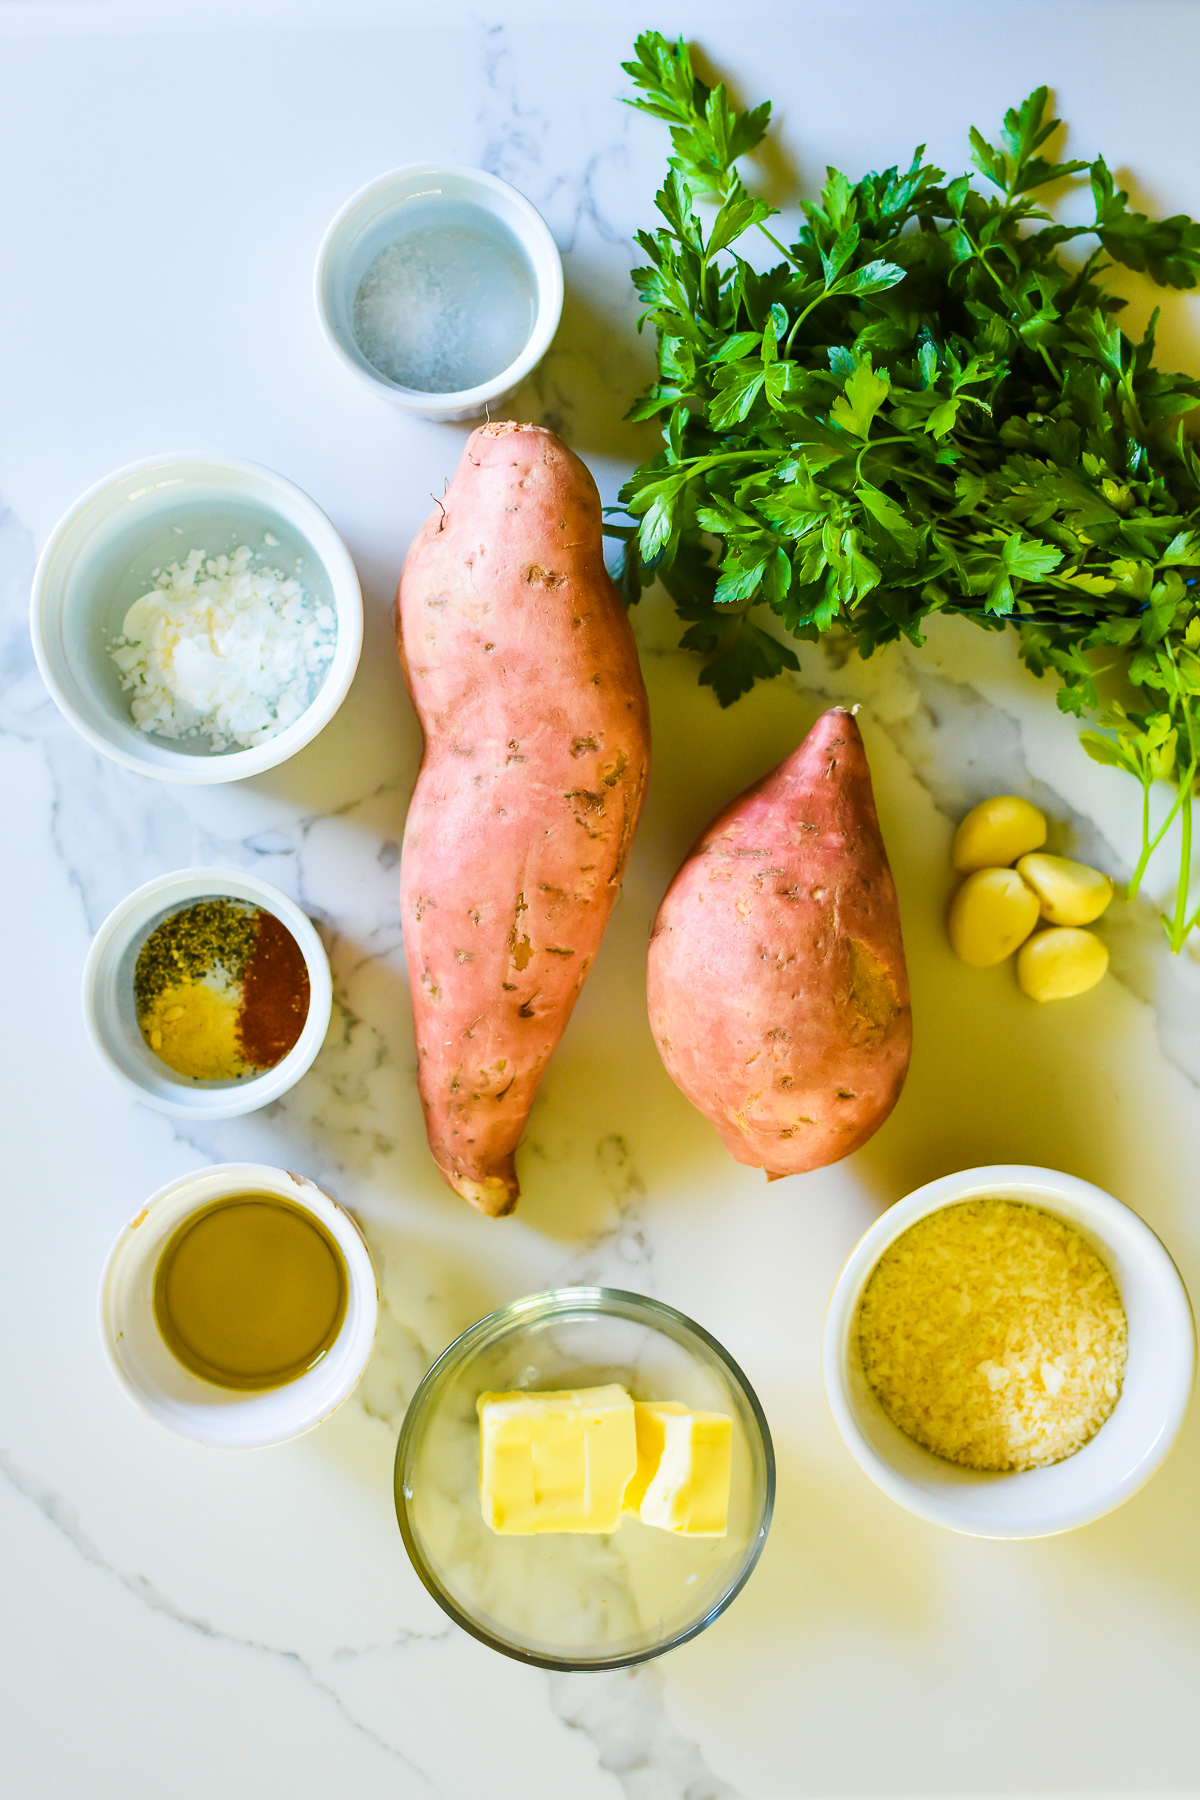 ingredients for crispy oven baked sweet potato fries on granite counter top: sweet potatoes, parsley, sea salt, cornstarch, spices, avocado oil, butter, parmesan cheese, and garlic cloves.